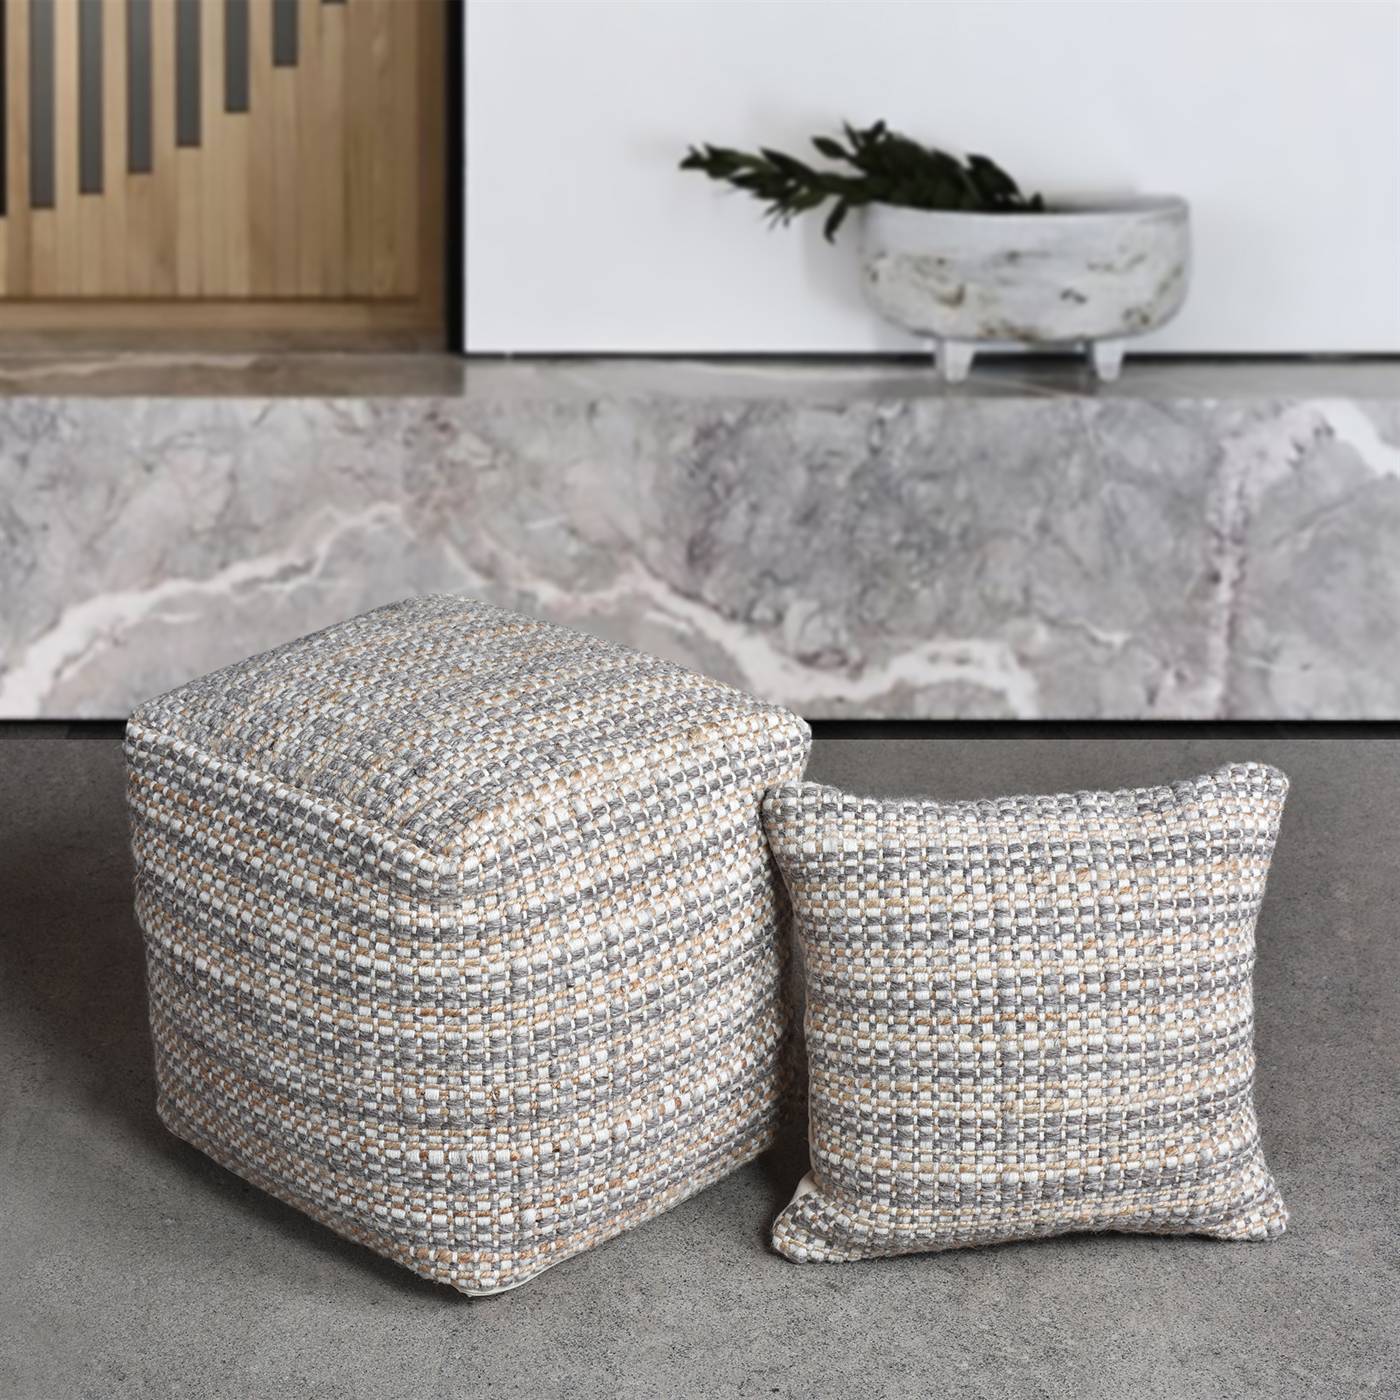 Mcalpin Pouf, 40x40x40 cm, Natural, Taupe, Wool, Jute, Hand Woven, Pitloom, Flat Weave